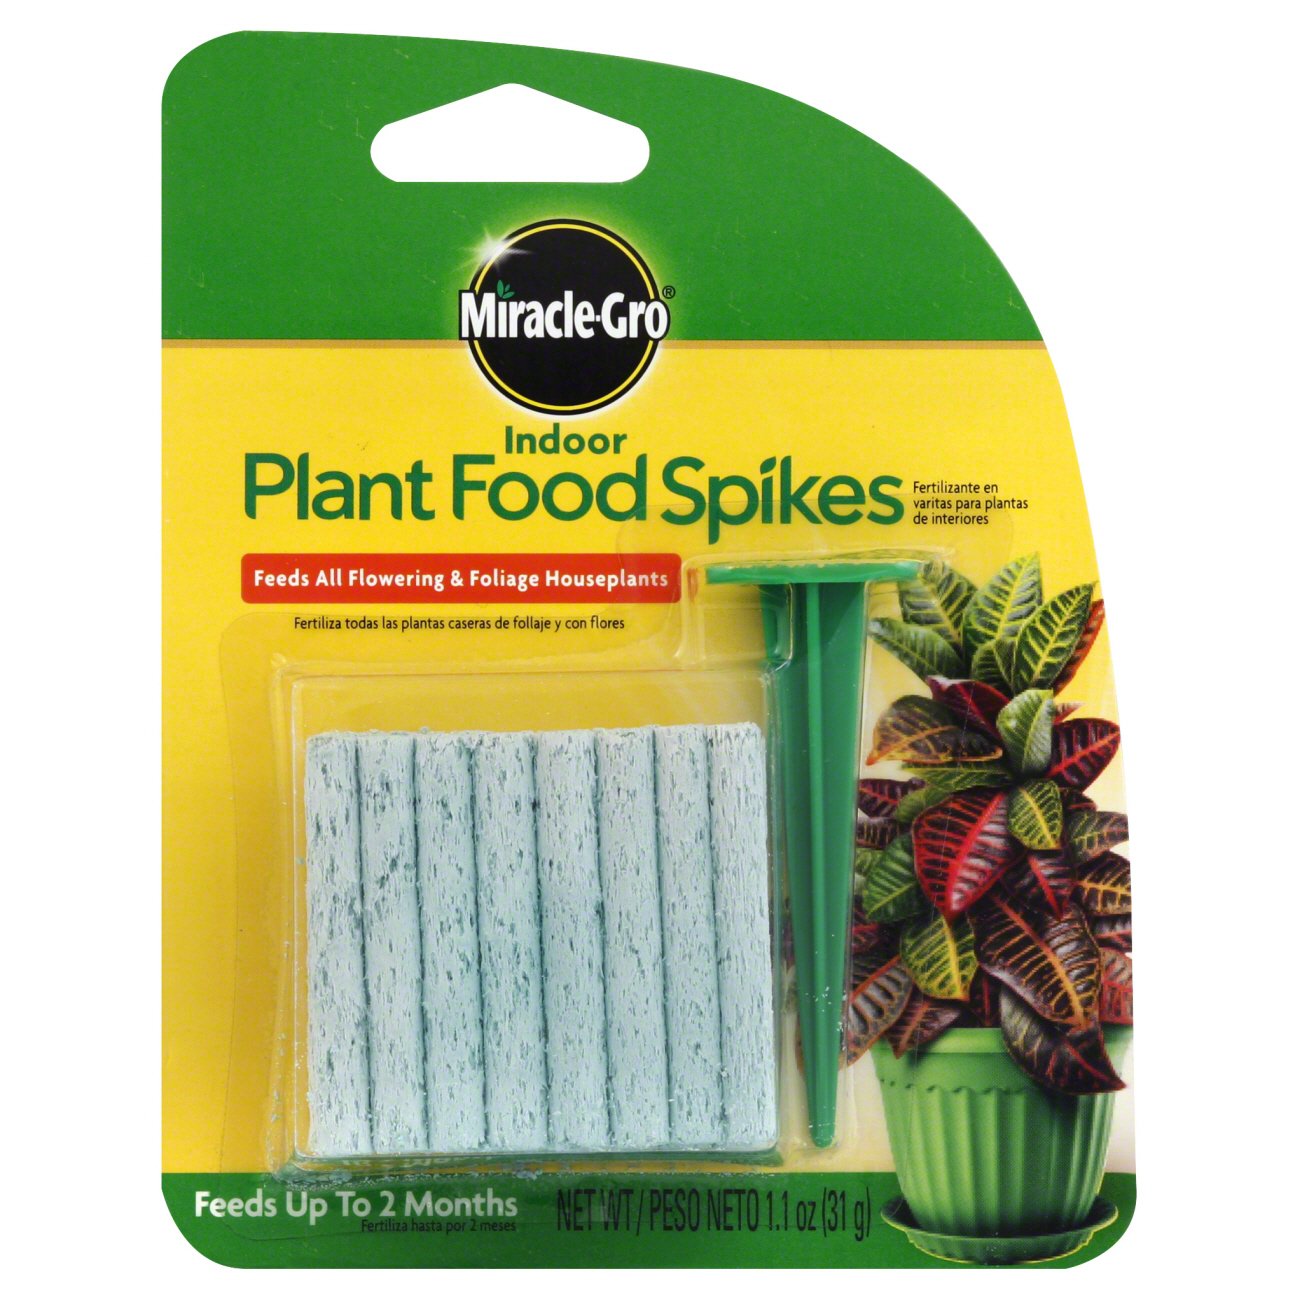 Miracle-Gro Indoor Plant Food Spikes Feed and Grow Stronger House plants 1.1 oz. 